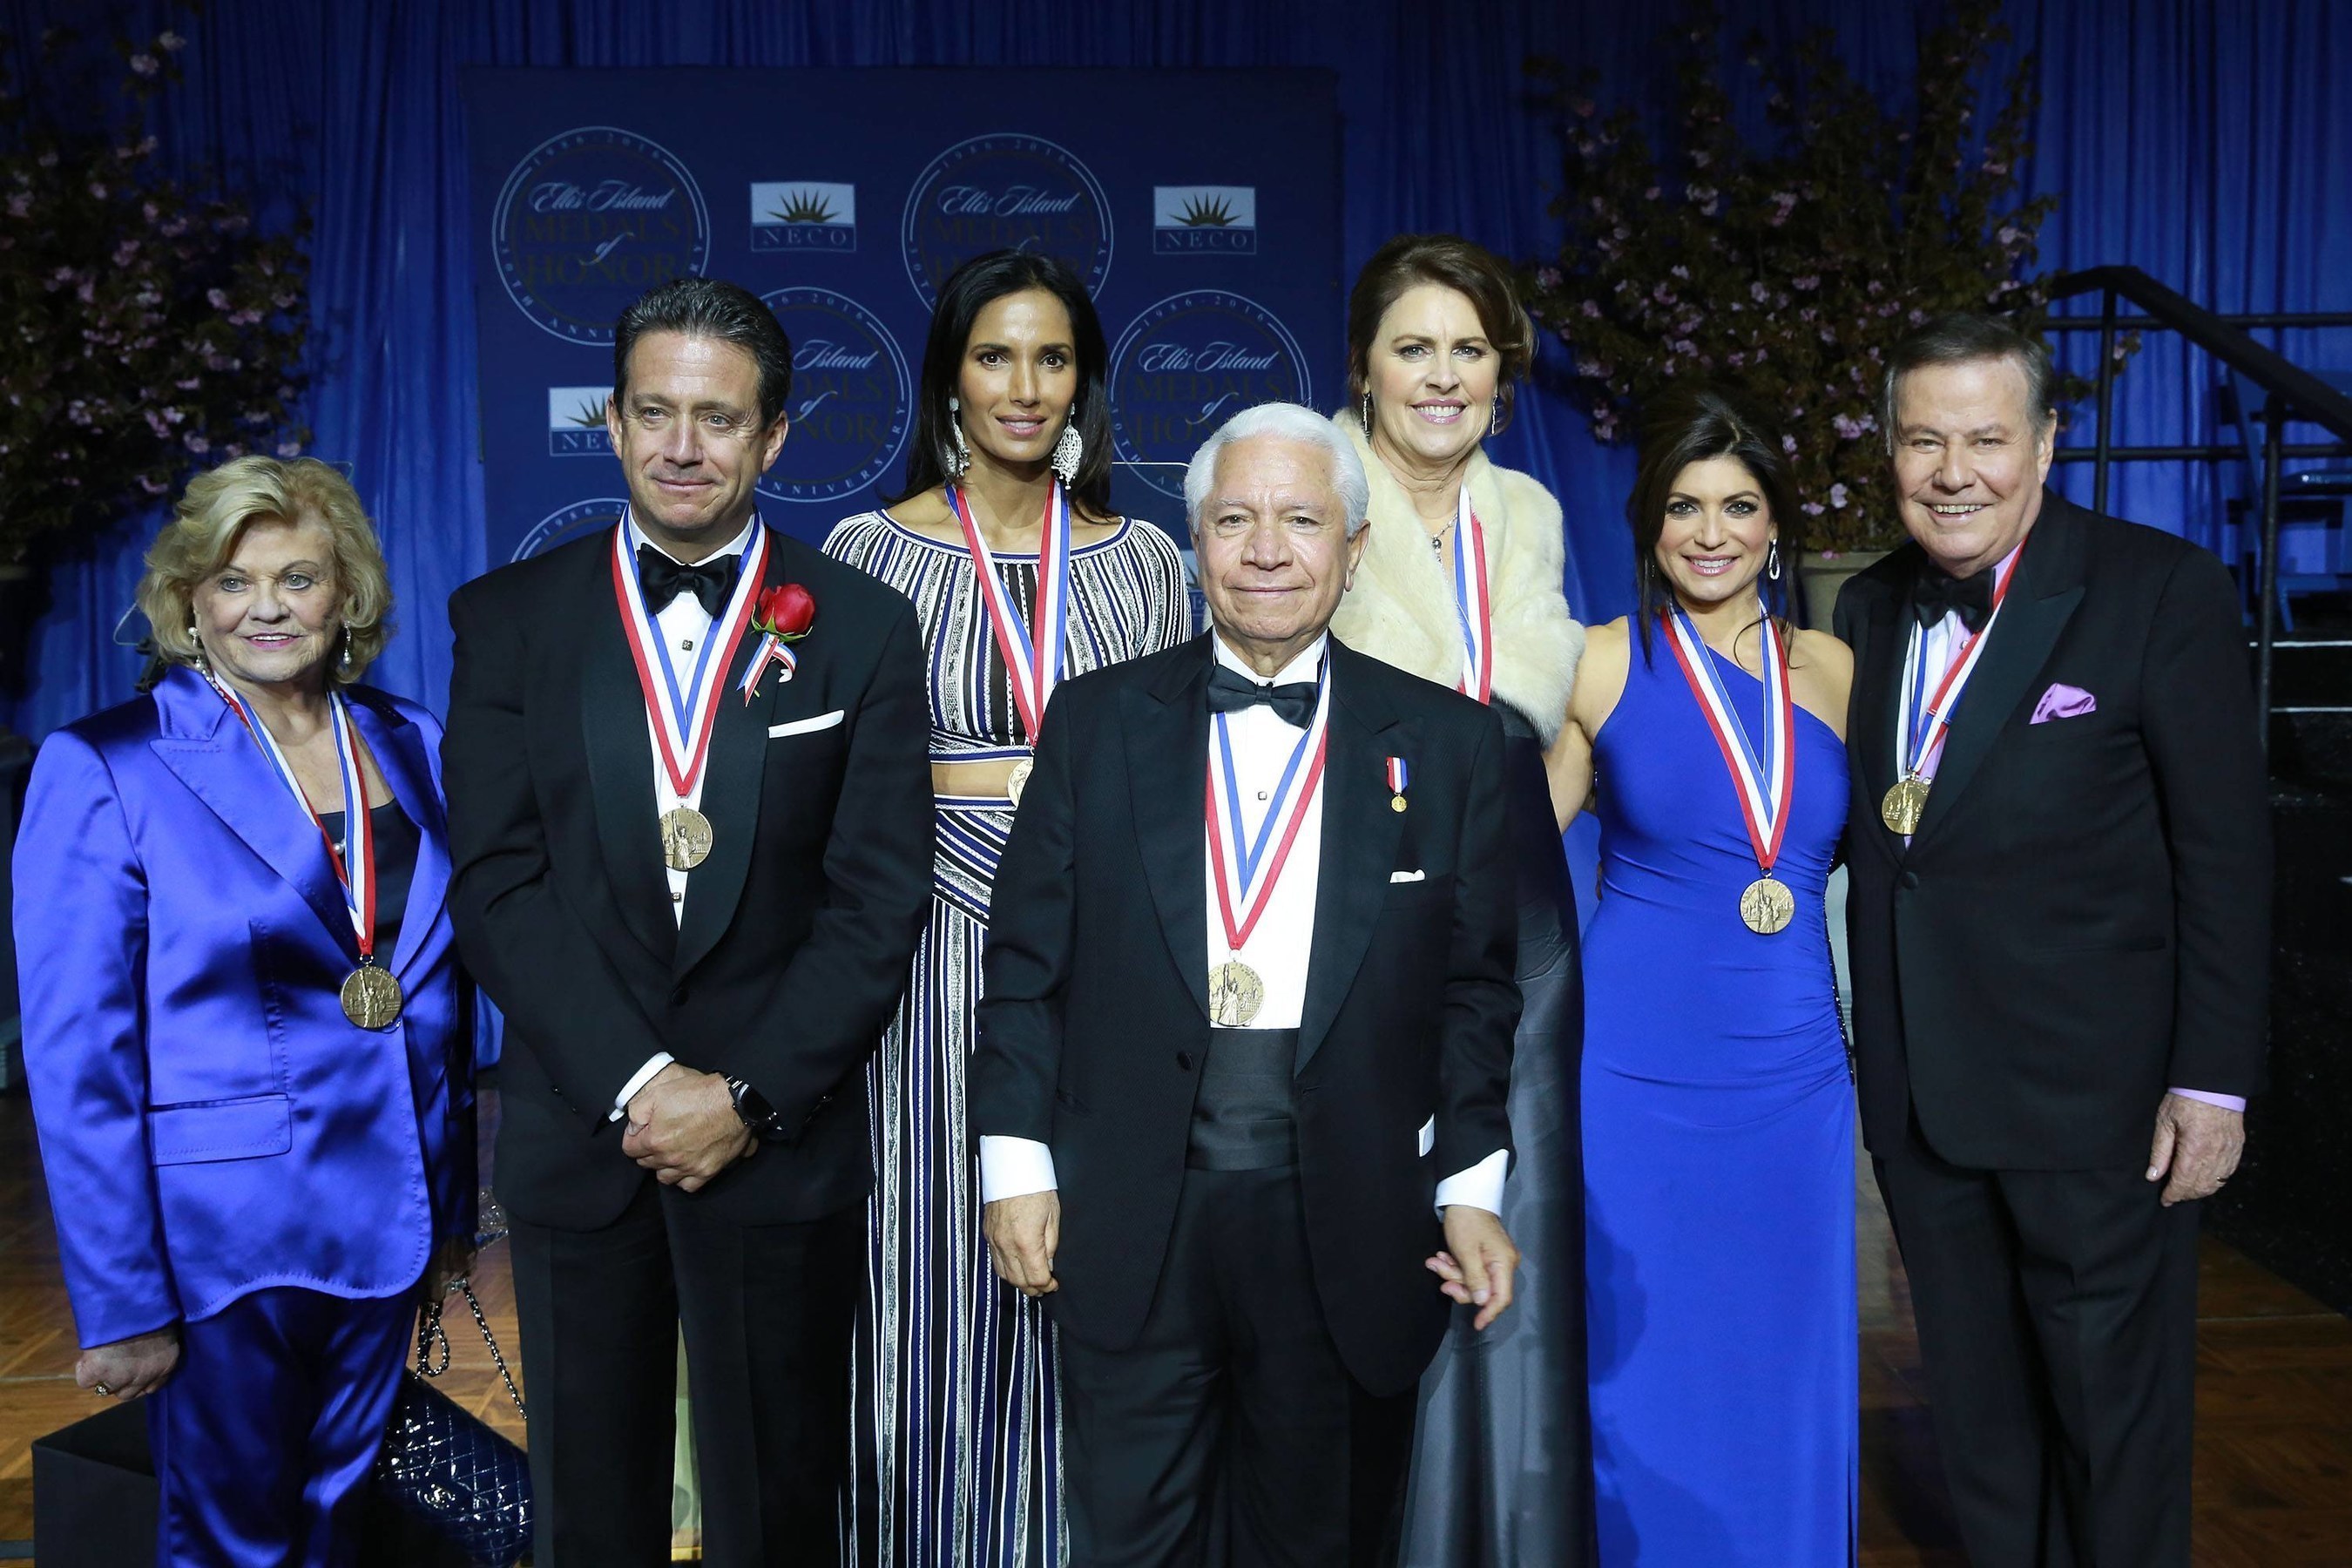 Photo Caption (left to right): Lorraine Thomas, philanthropist and co-founder of The Dave Thomas Foundation for Adoption, Bill Evans, meteorologist WABC-TV, Padma Lakshmi, TV host, Nasser J. Kazeminy, Chairman of the National Ethnic Coalition of Organizations-NECO, Ali Torre, co-founder of the Joe Torre Safe At Home Foundation, Tamsen Fadal, News Anchor WPIX-TV and Marvin Scott, Senior Correspondent WPIX-TV attend the National Ethnic Coalition of Organization's 2016 Ellis Island Medals of Honor awards ceremony on Ellis Island. (Photo by Amy Sussman AP Images)